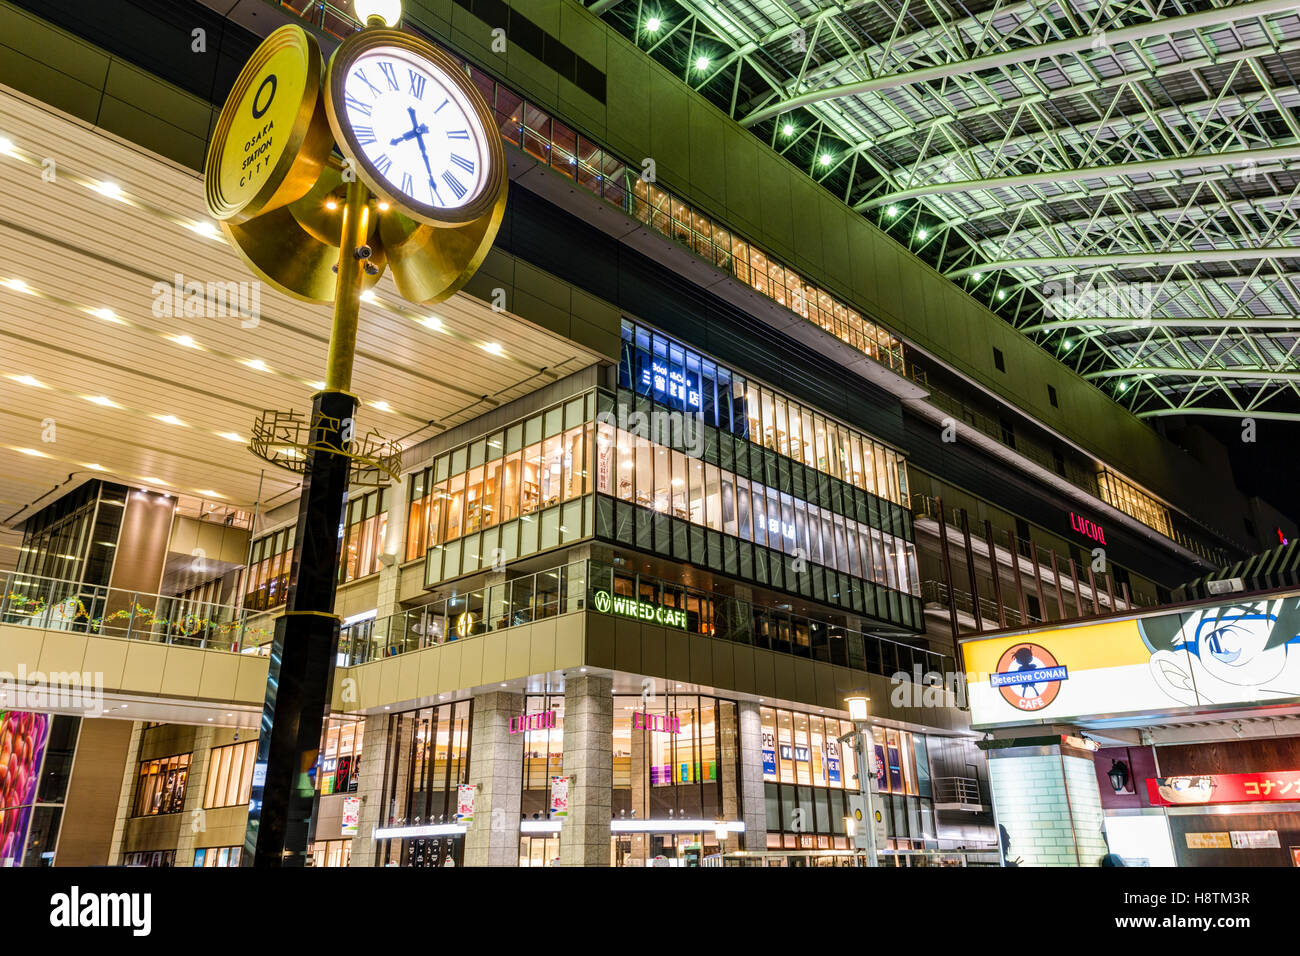 Japan, Osaka Station City Interior. Taki-no-hiroba Plaza, public concourse with clock and North Gate Building, shops, and entrance. Night time. Stock Photo